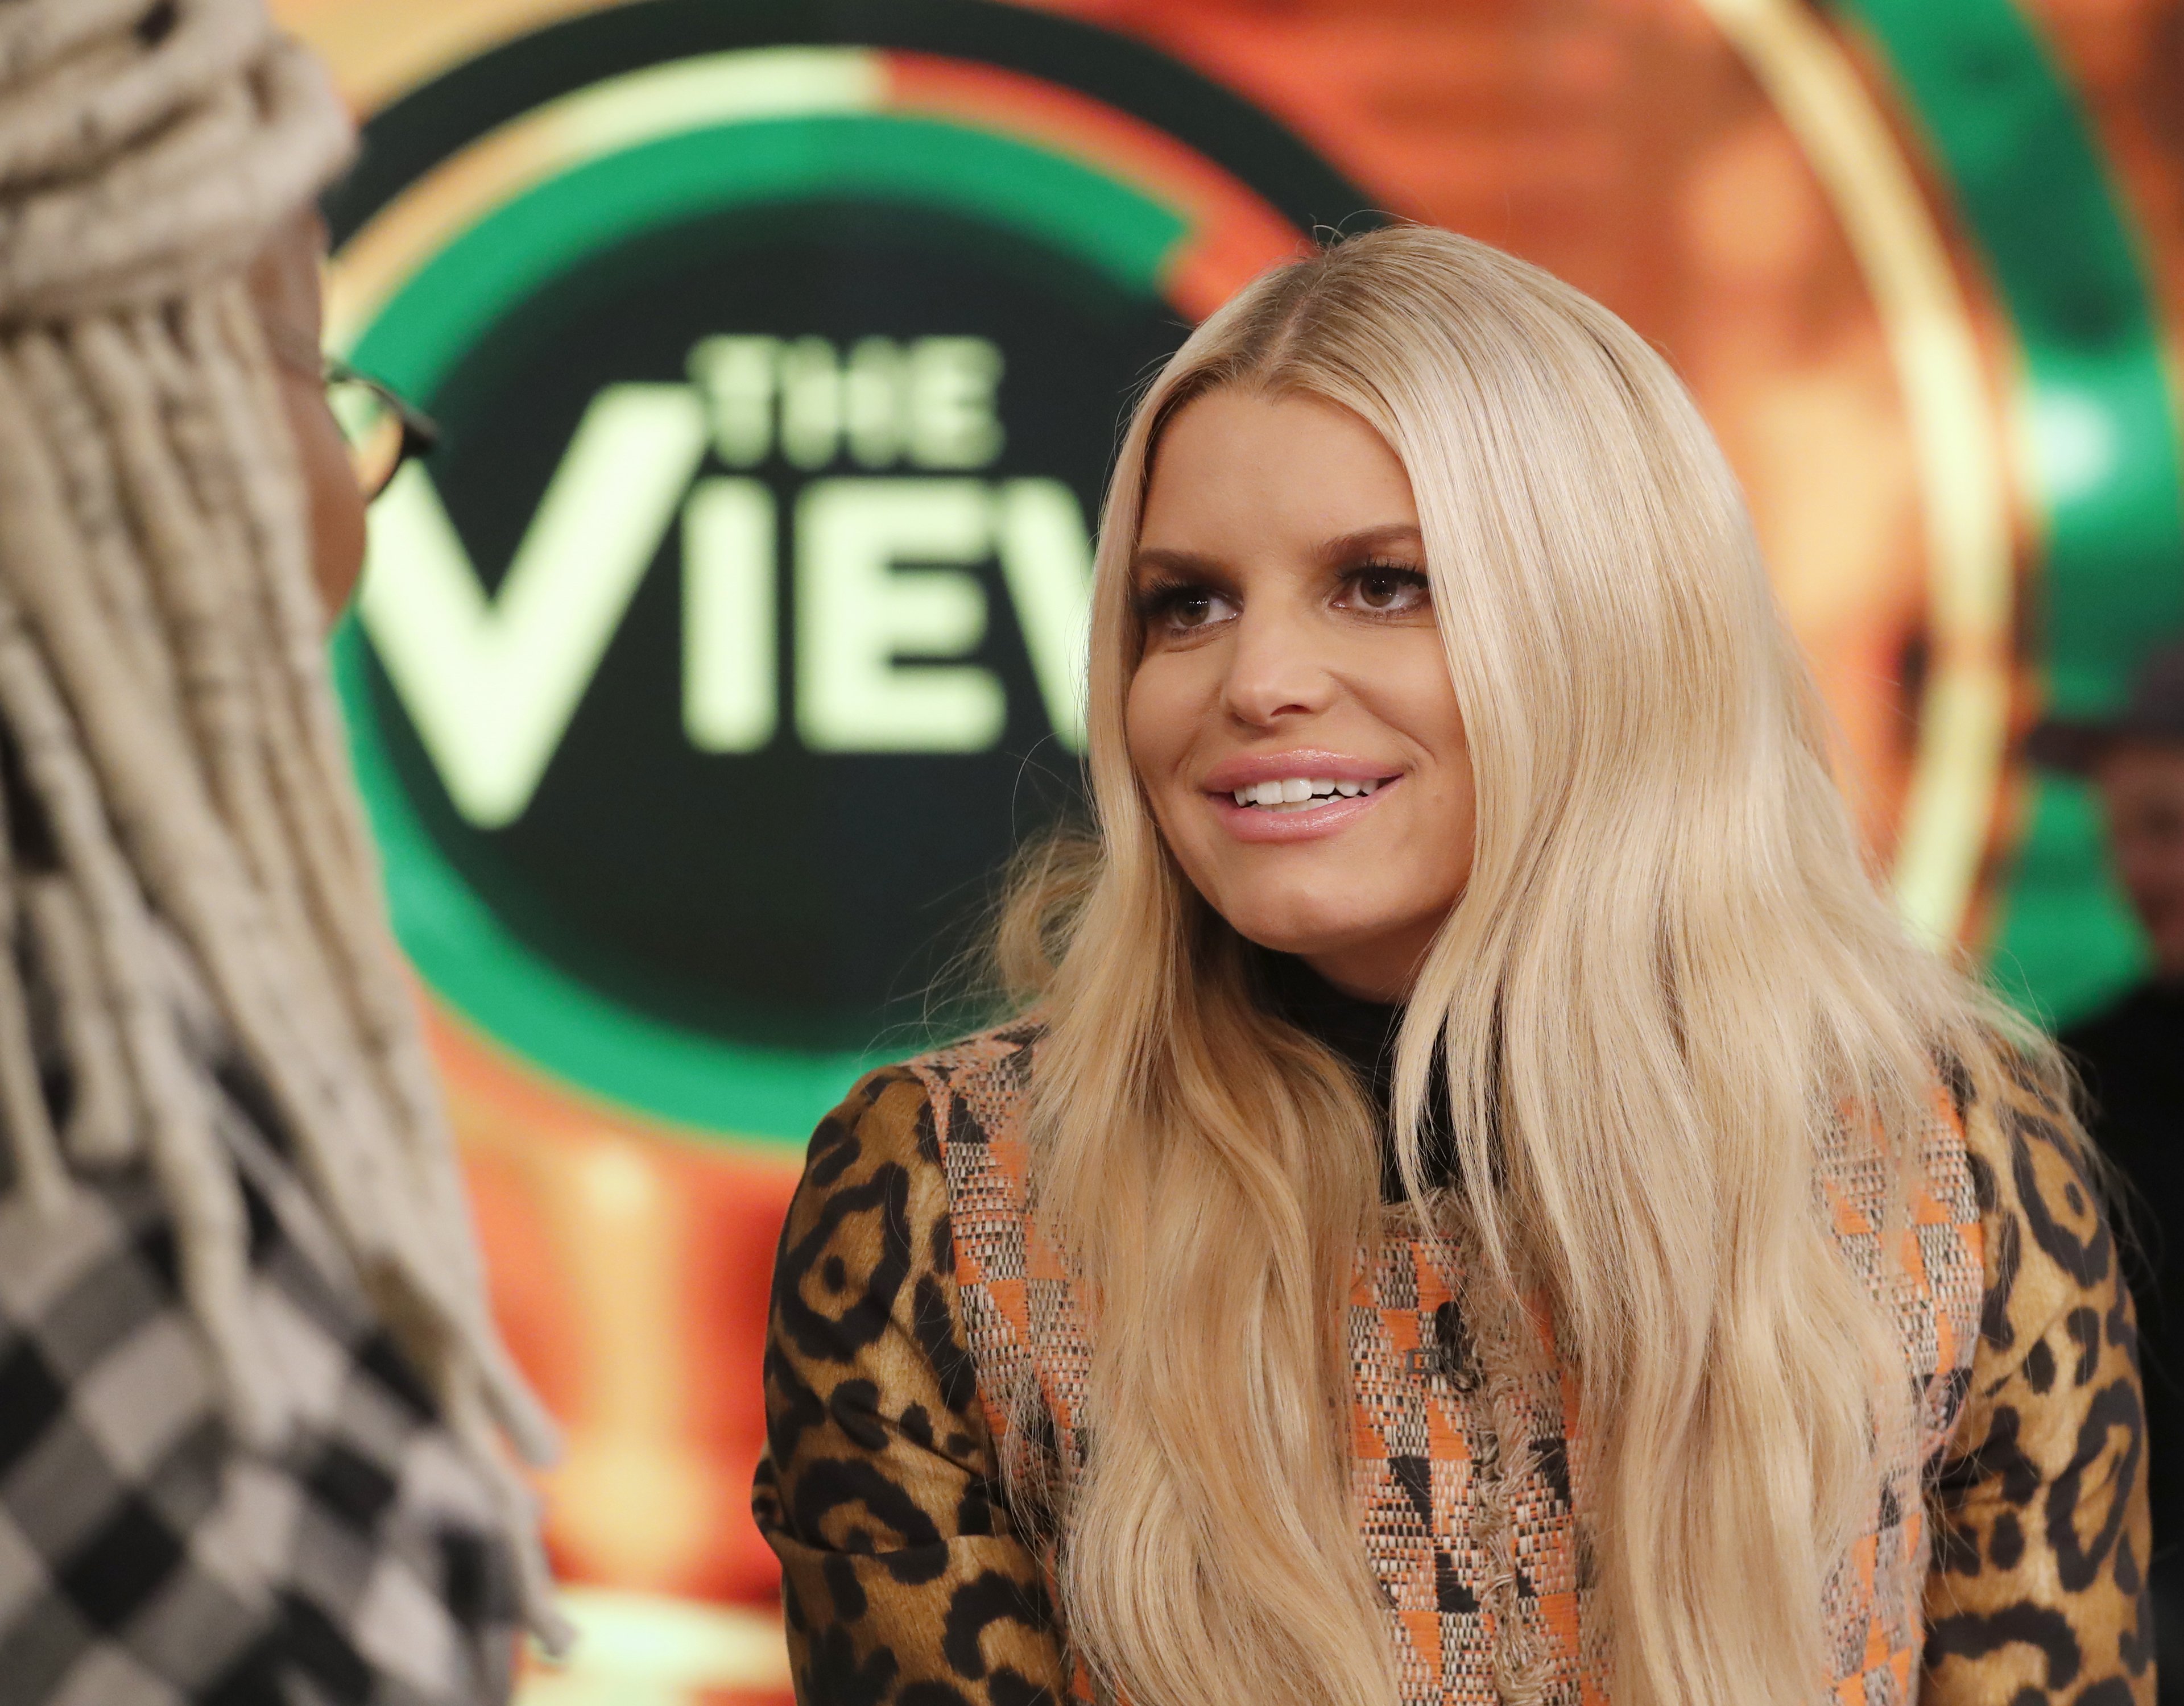 Jessica Simpson graces "The View" show at ABC on February 5, 2020. | Source: Getty Images